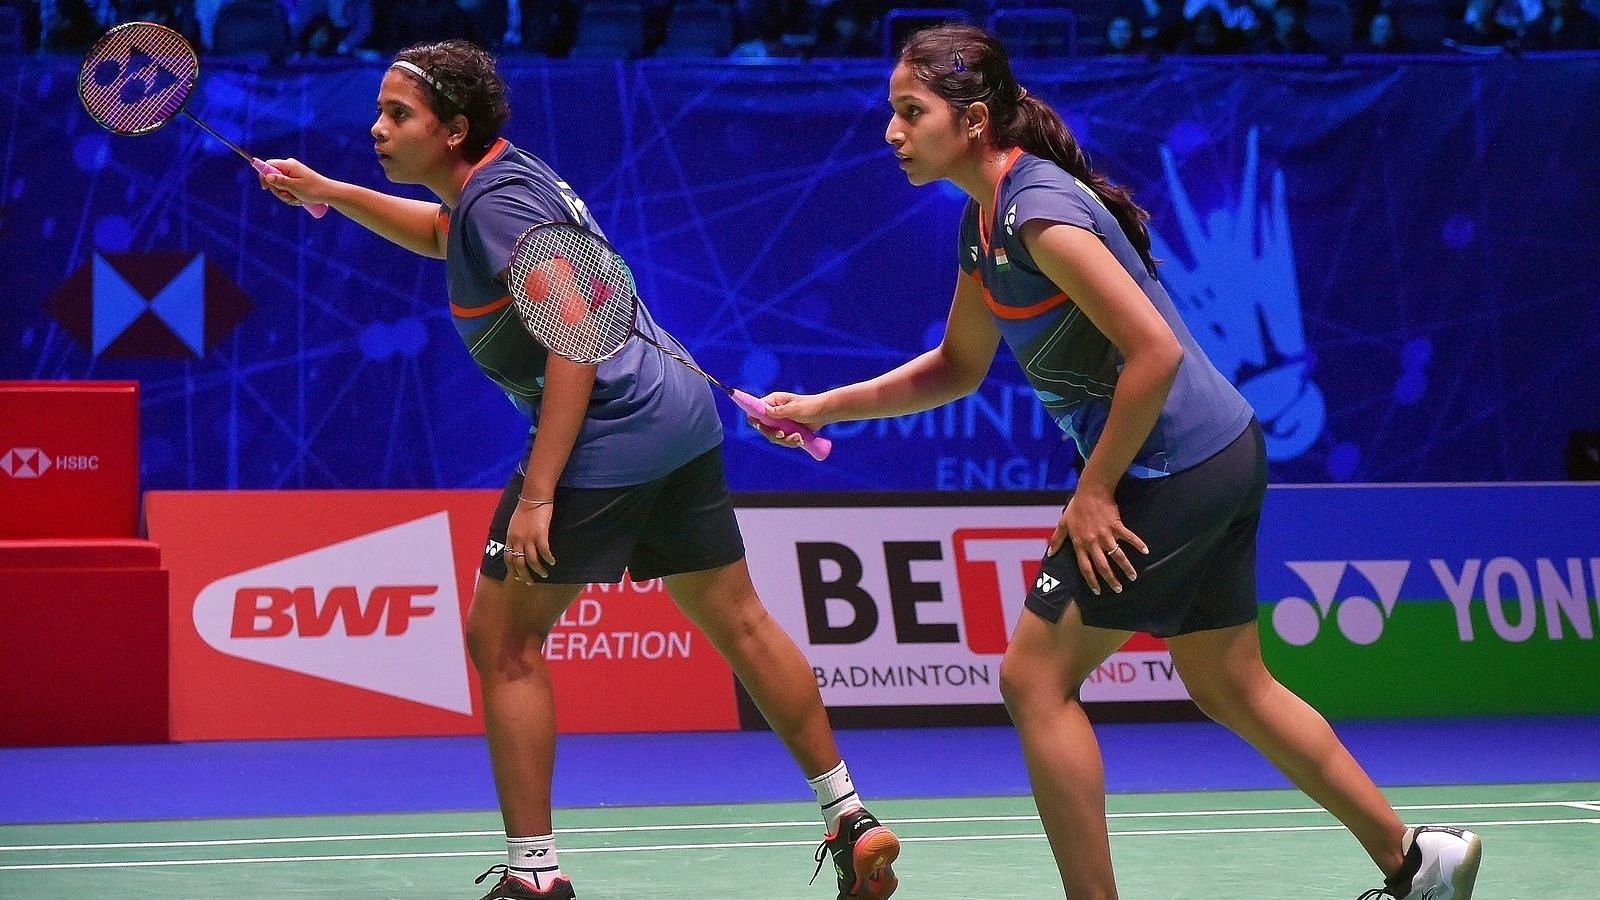 India in action at the Hong Kong Open